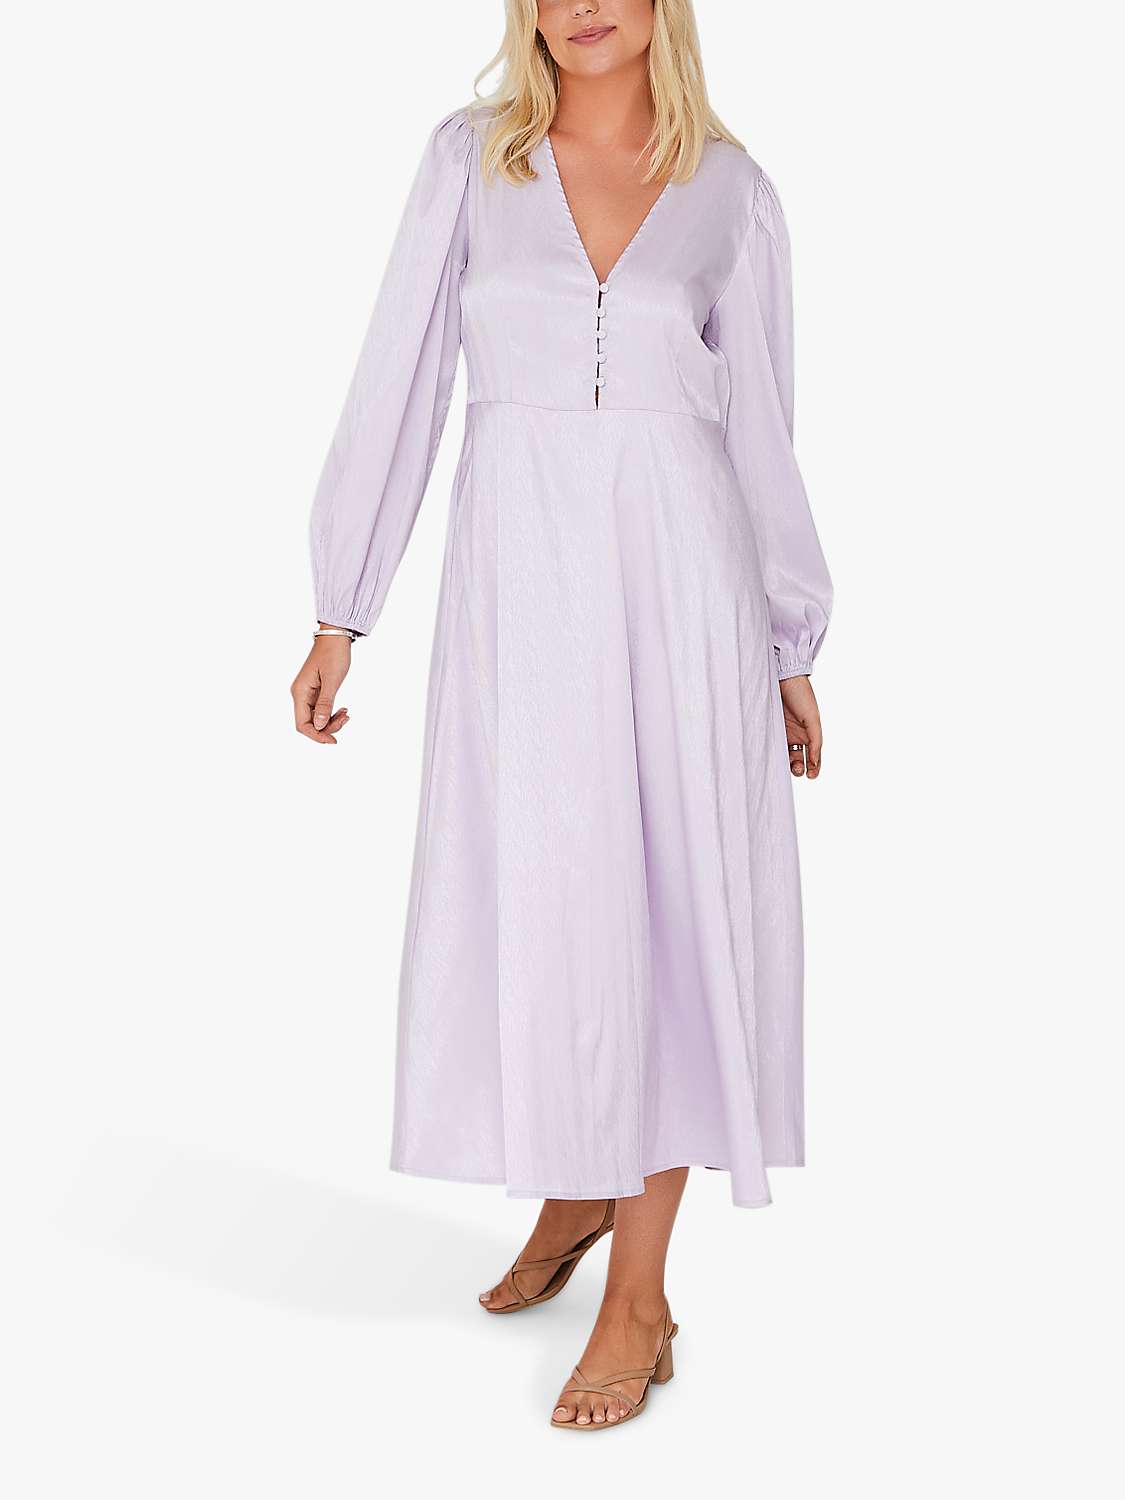 Buy A-VIEW Enitta Midi Dress, 301 Lilac Online at johnlewis.com